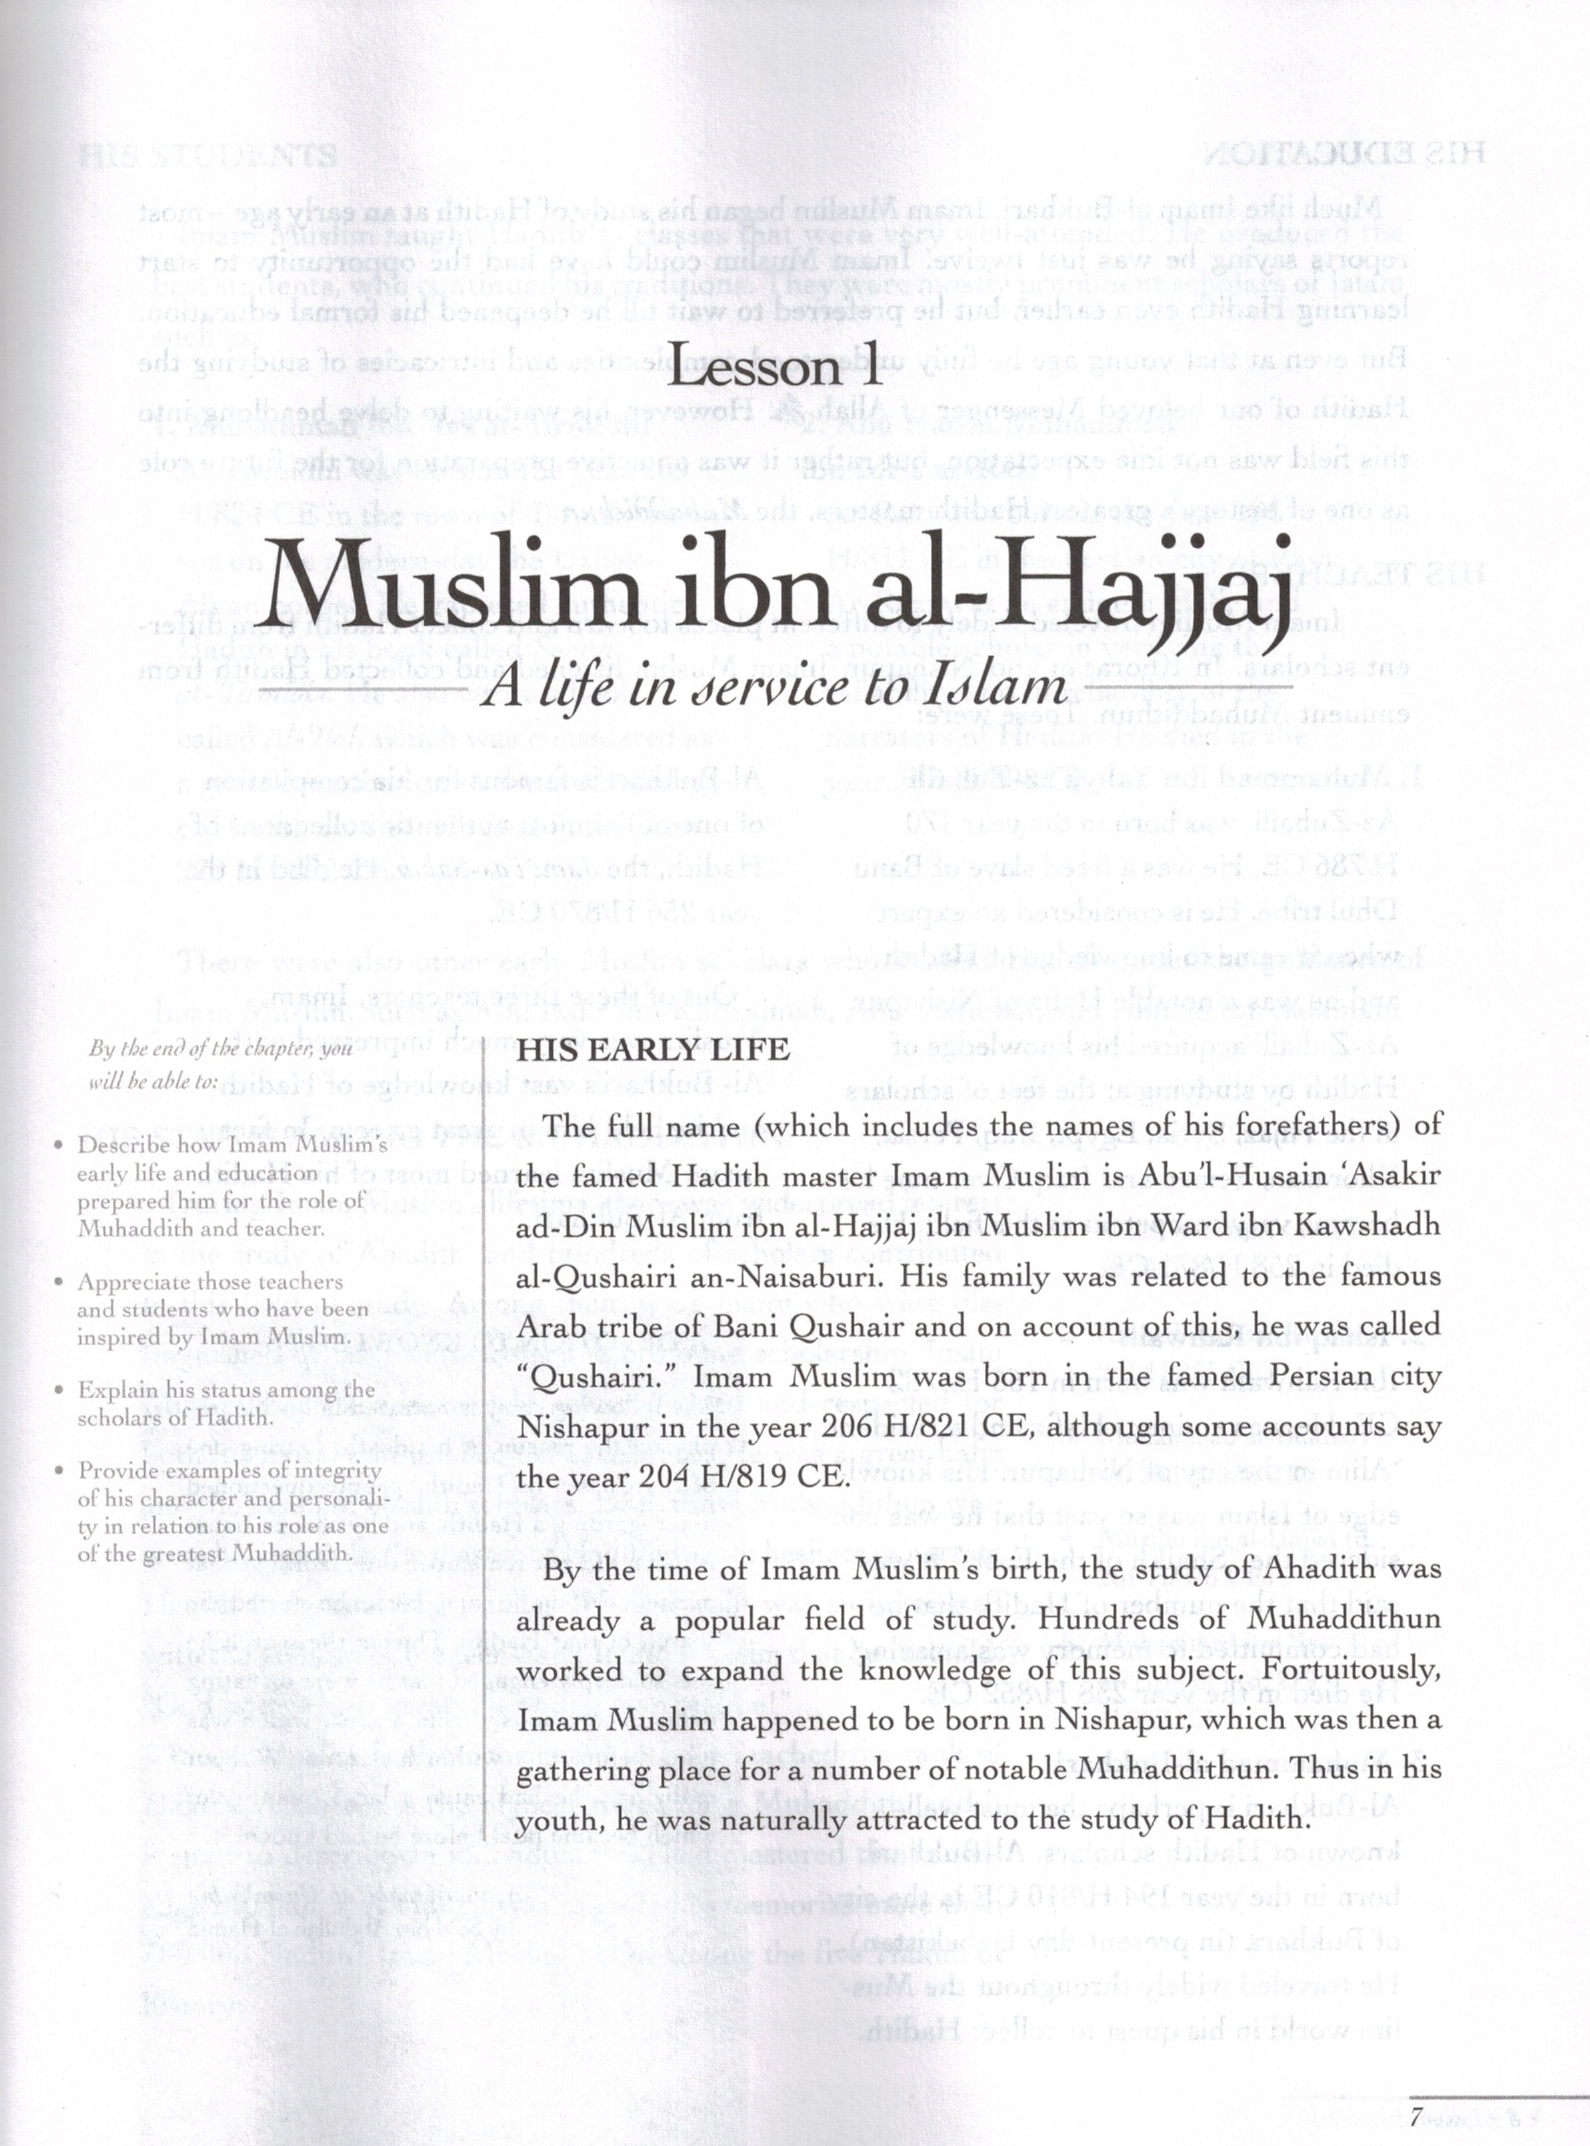 The Sahih of Imam Muslim - Ulum ul-Hadith - Premium Textbook from IQRA' international Educational Foundation - Just $20! Shop now at IQRA Book Center | A Division of IQRA' international Educational Foundation